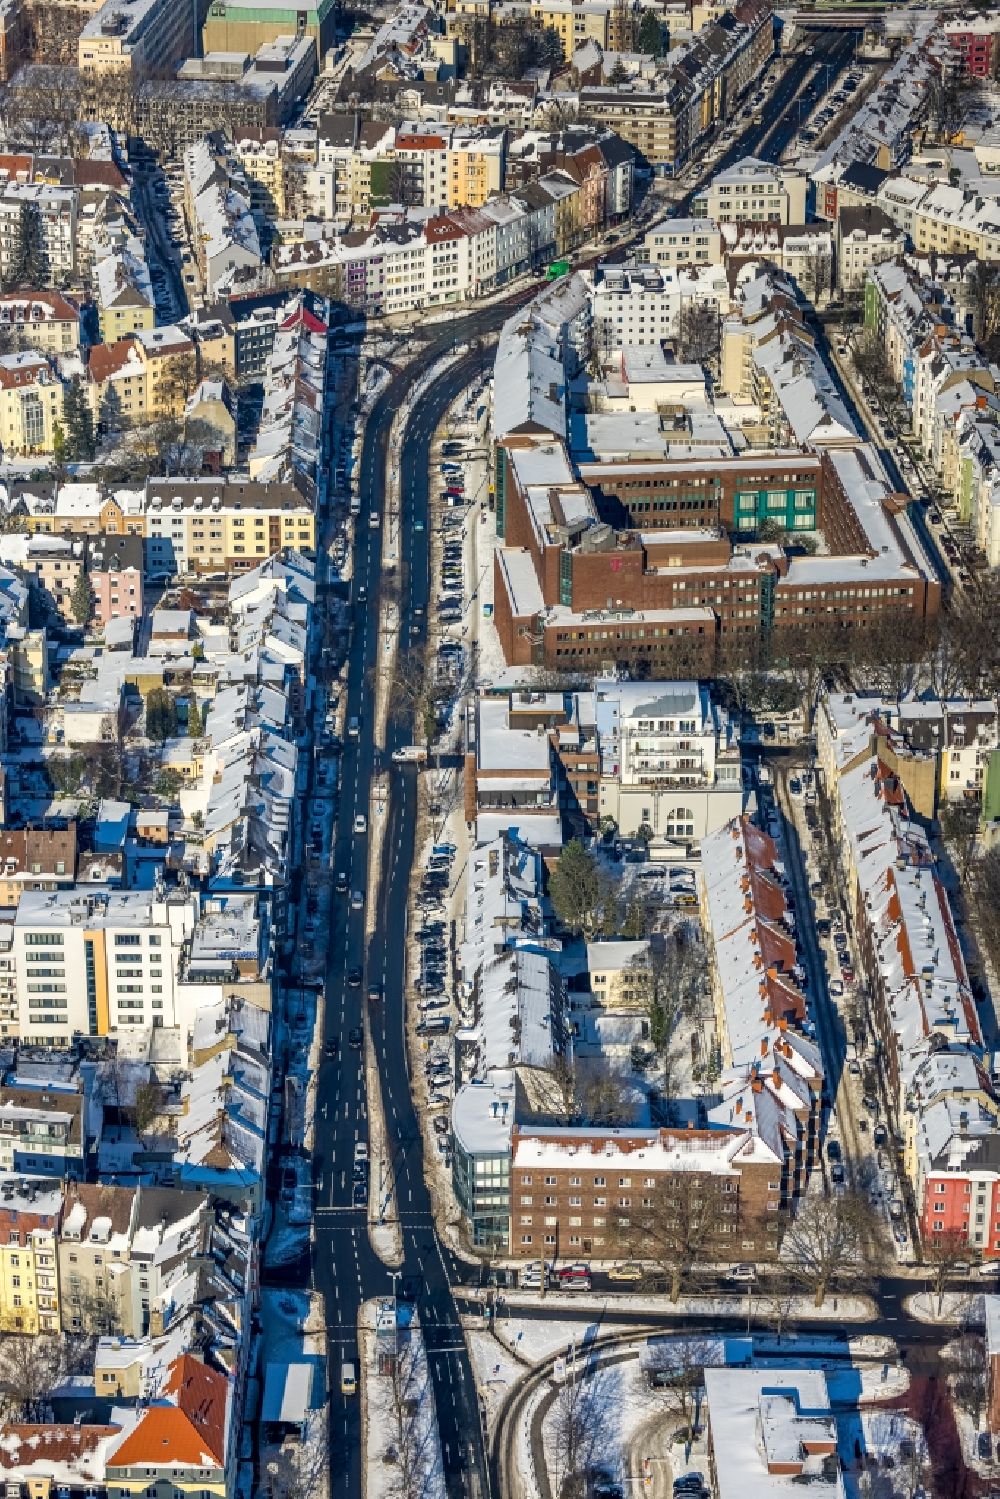 Dortmund from the bird's eye view: Wintry snowy street - road guidance Hohe Strasse overlooking the Telekom company administration building in the district Westfalenhalle in Dortmund at Ruhrgebiet in the state North Rhine-Westphalia, Germany